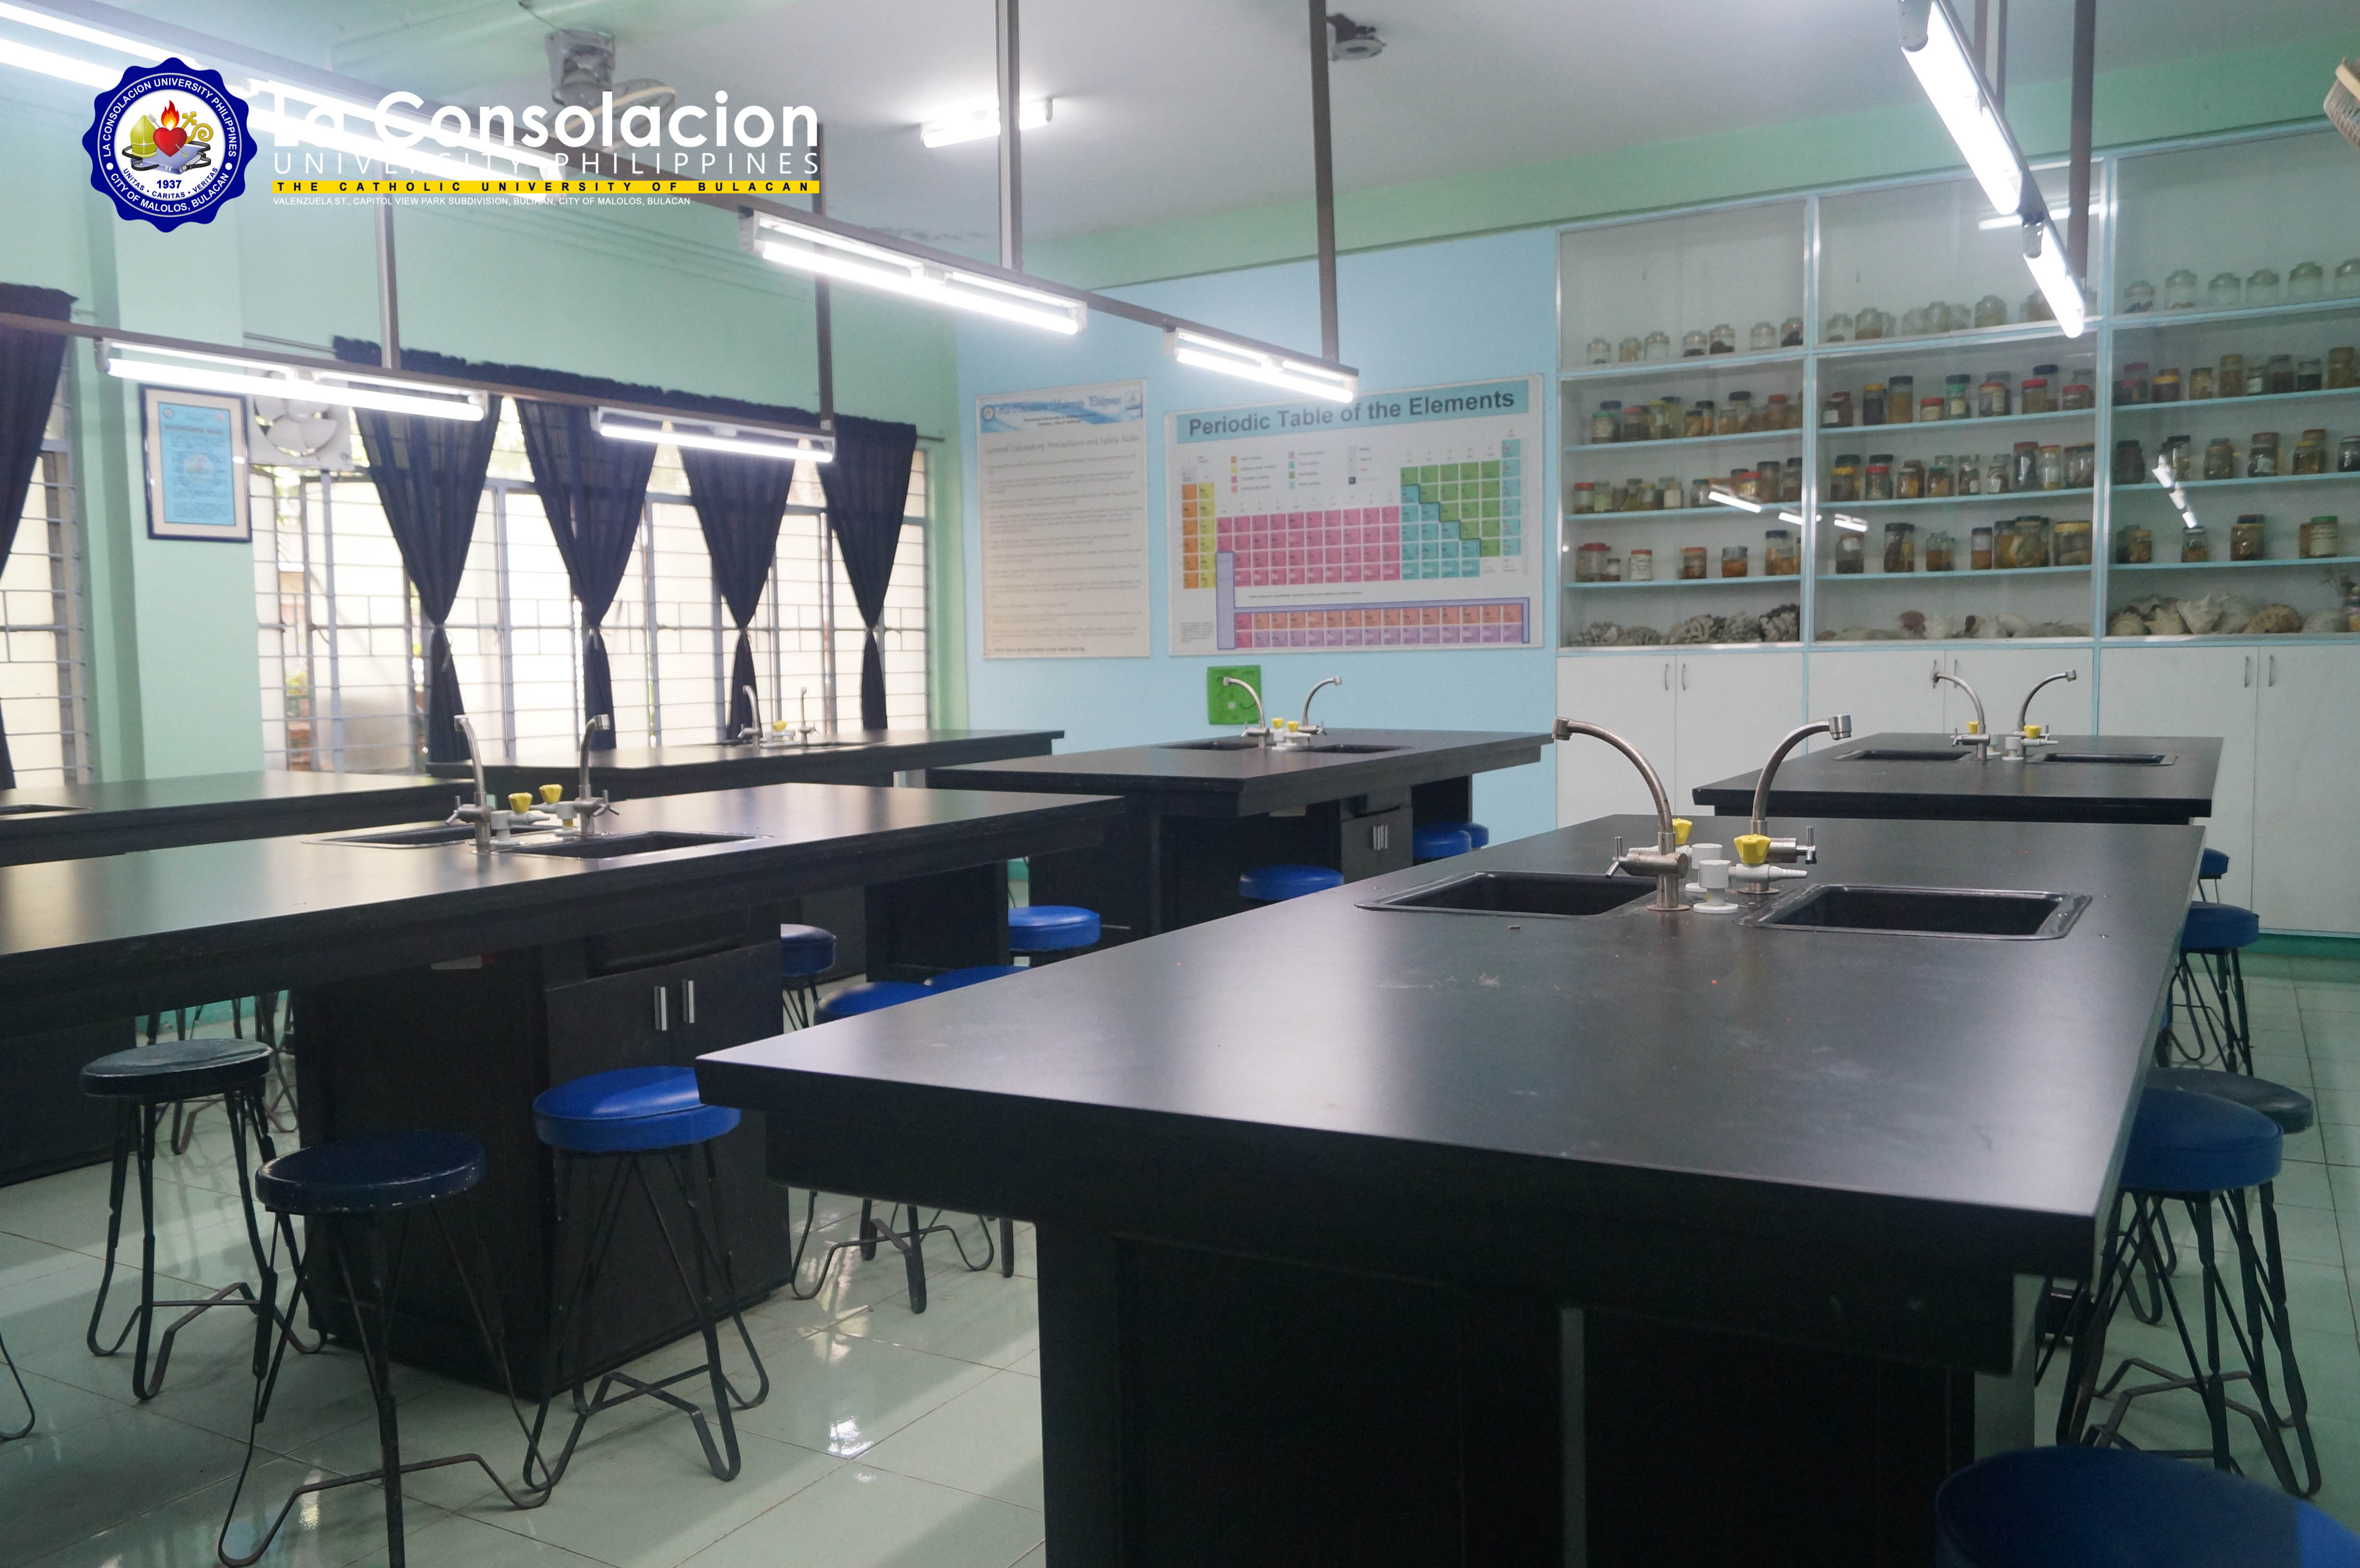 BED - Science Laboratory